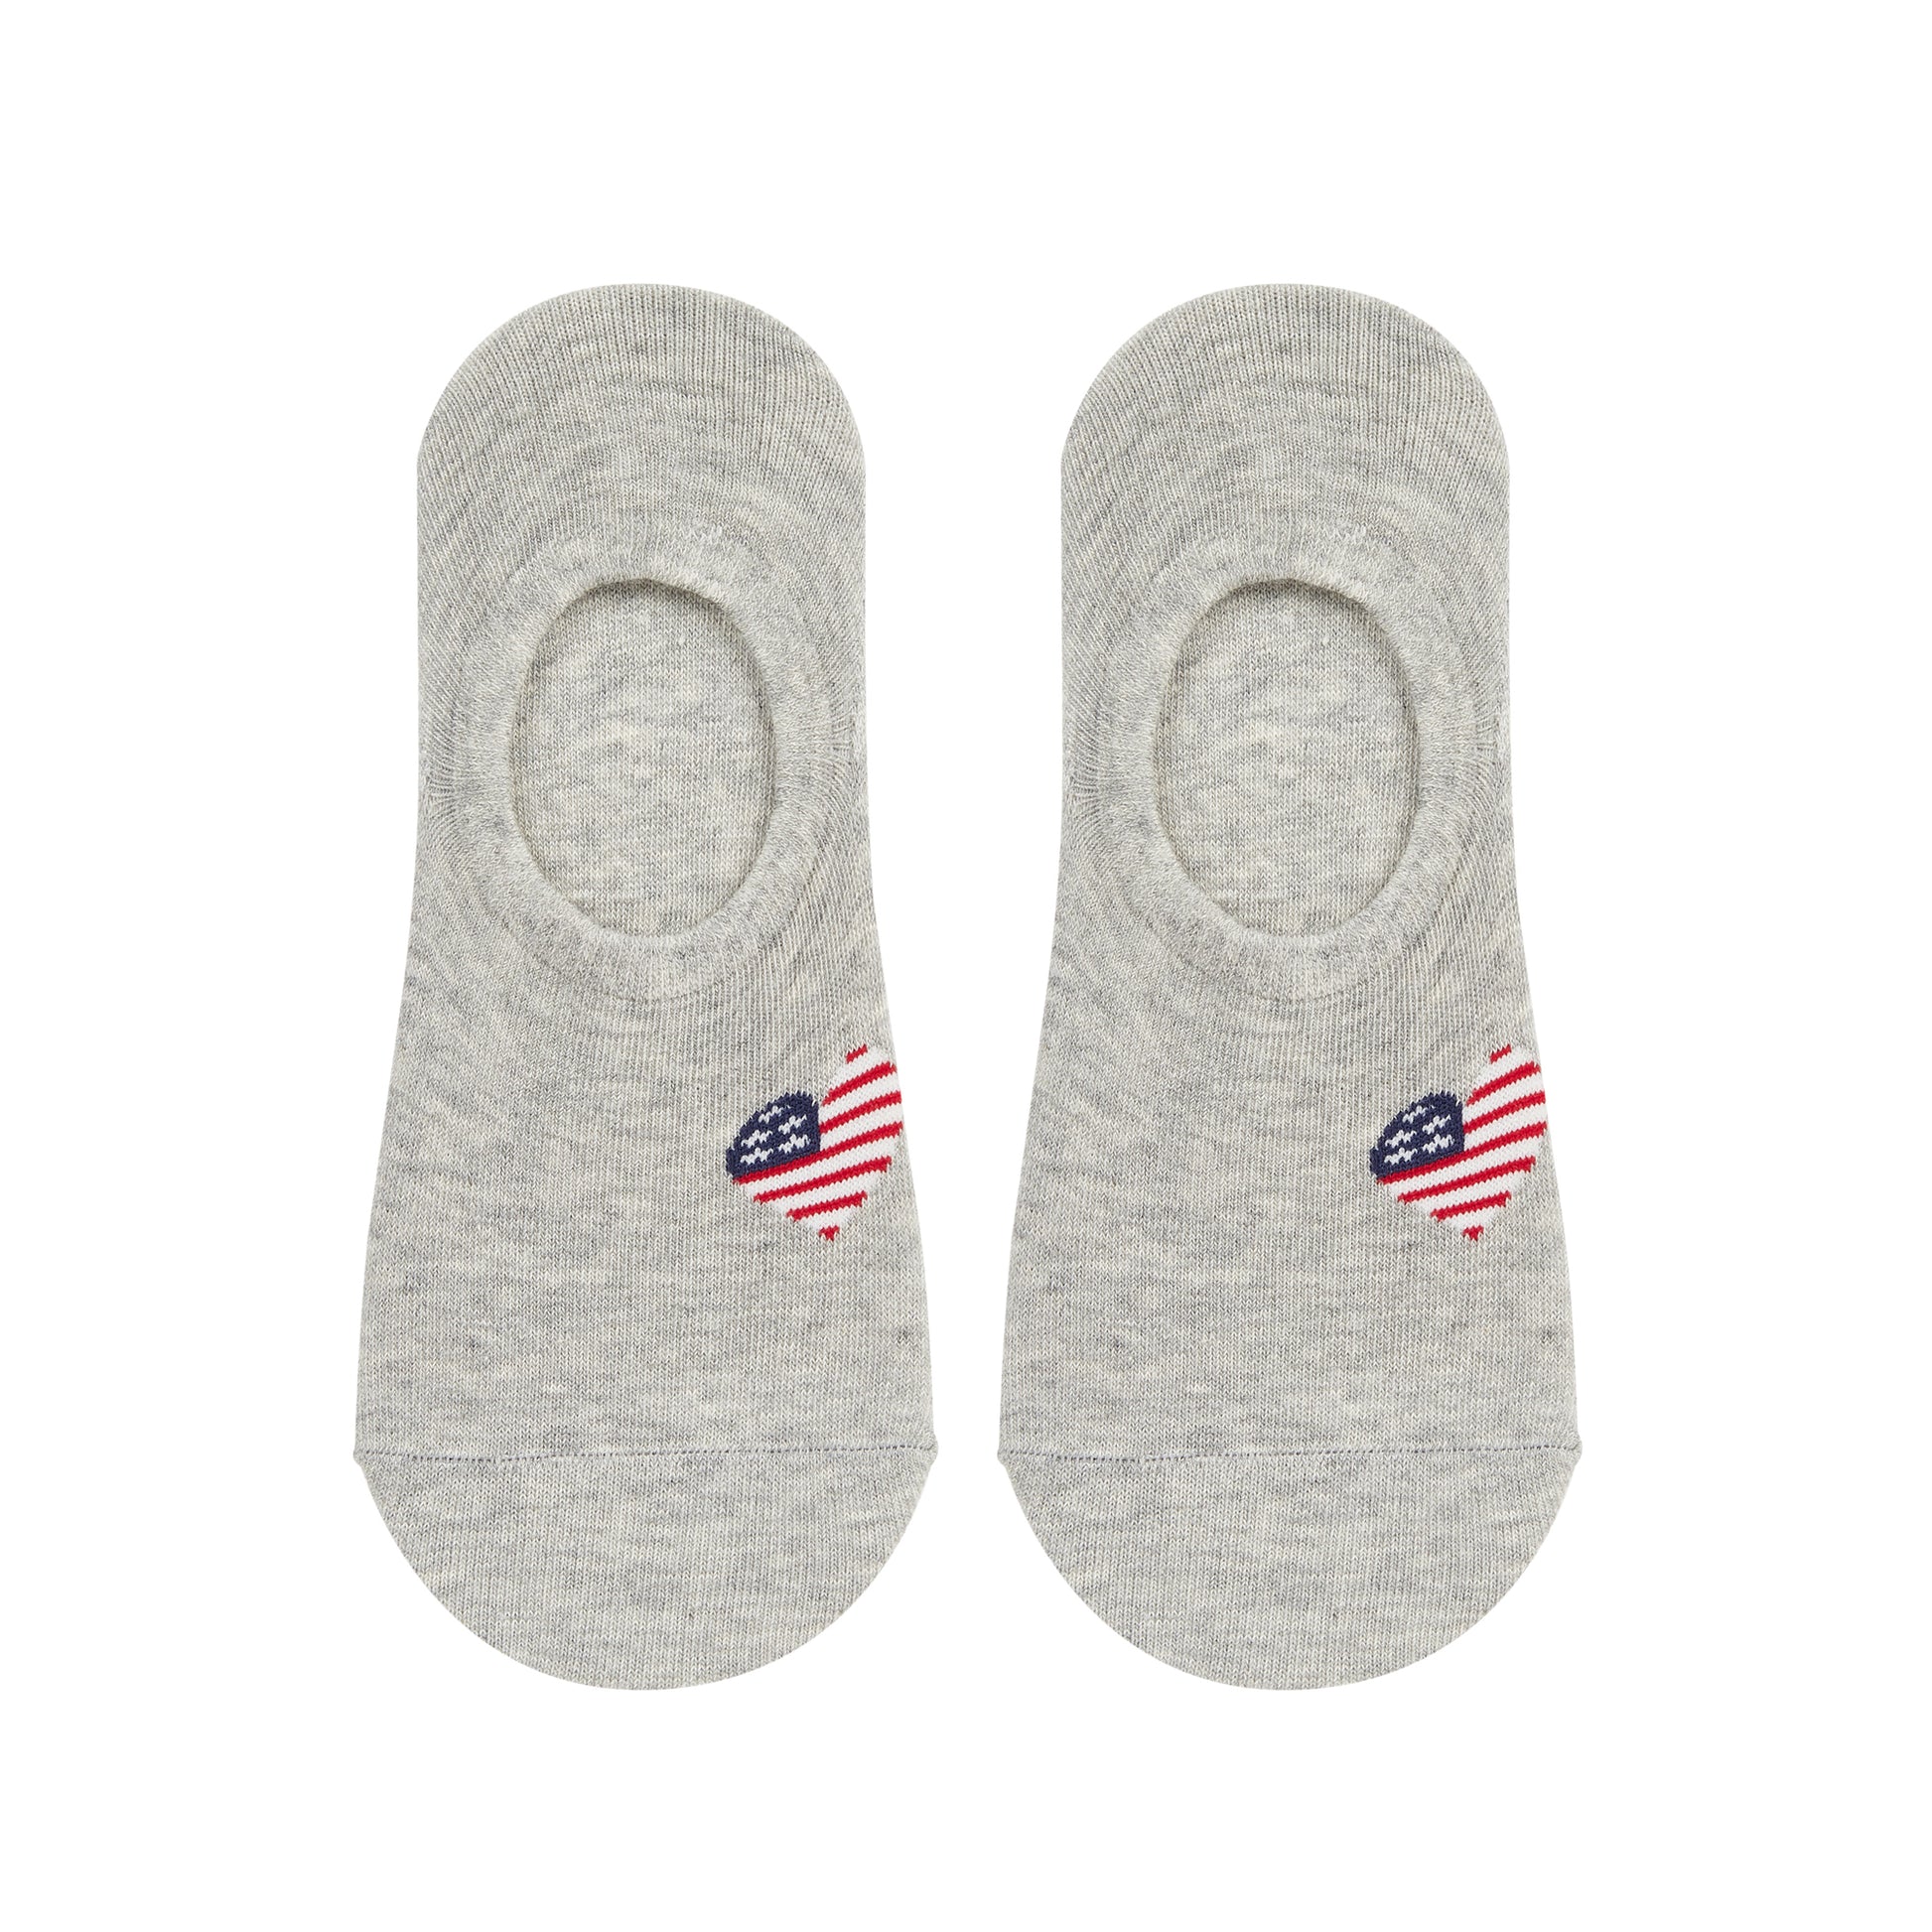 Women's Invisible Foot Socks 4-in-1 Set with USA Heart Print - IDENTITY Apparel Shop